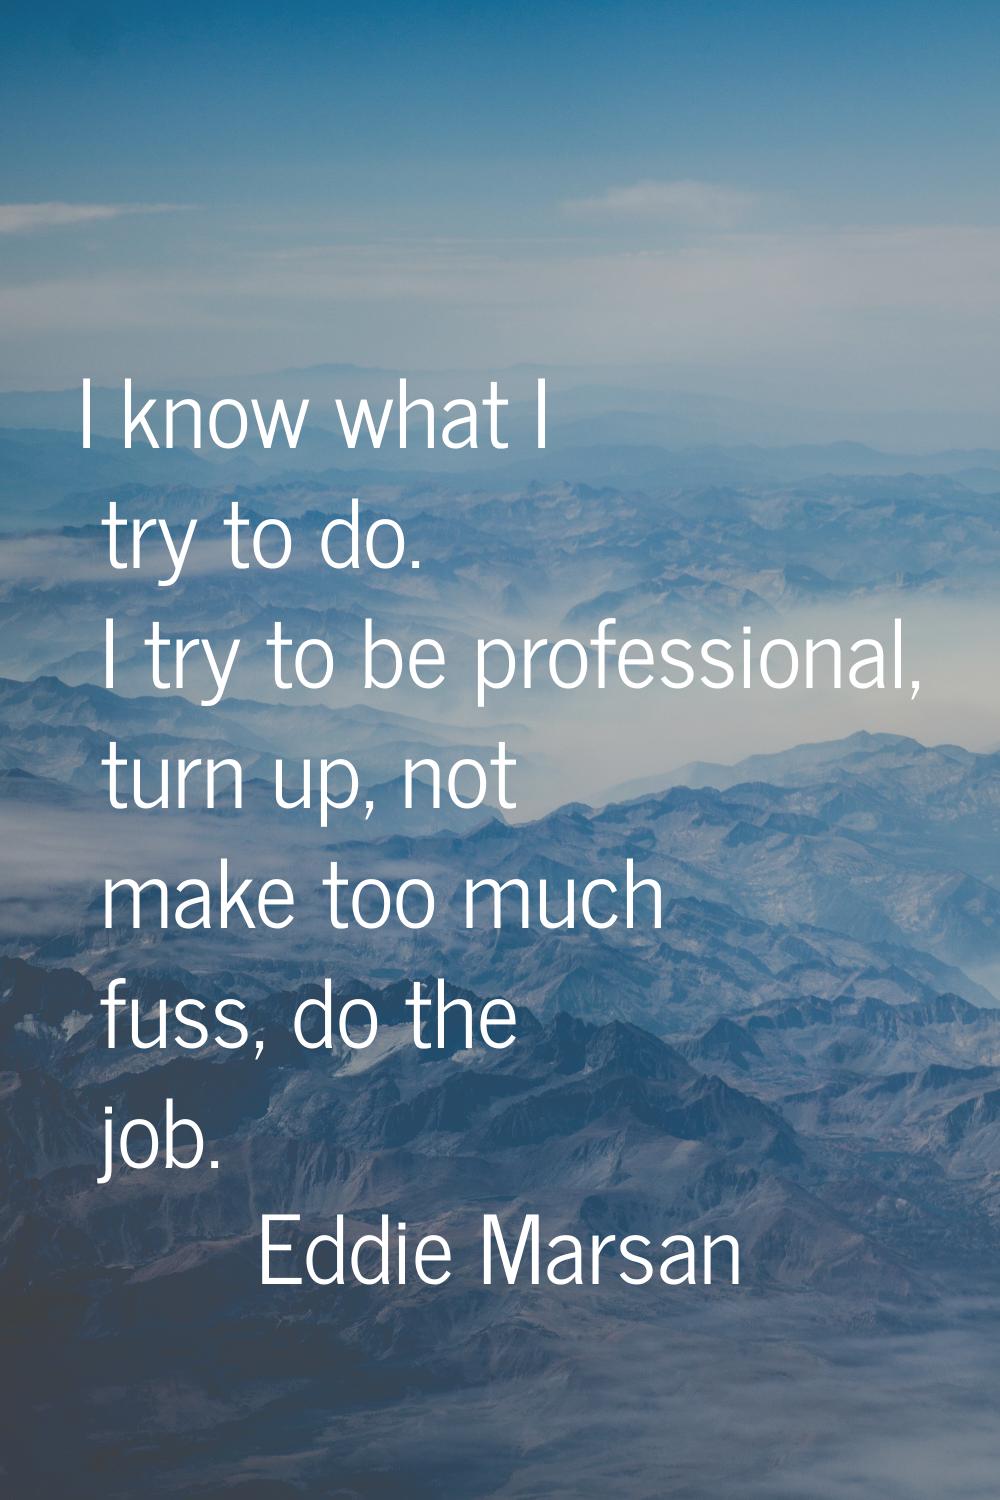 I know what I try to do. I try to be professional, turn up, not make too much fuss, do the job.